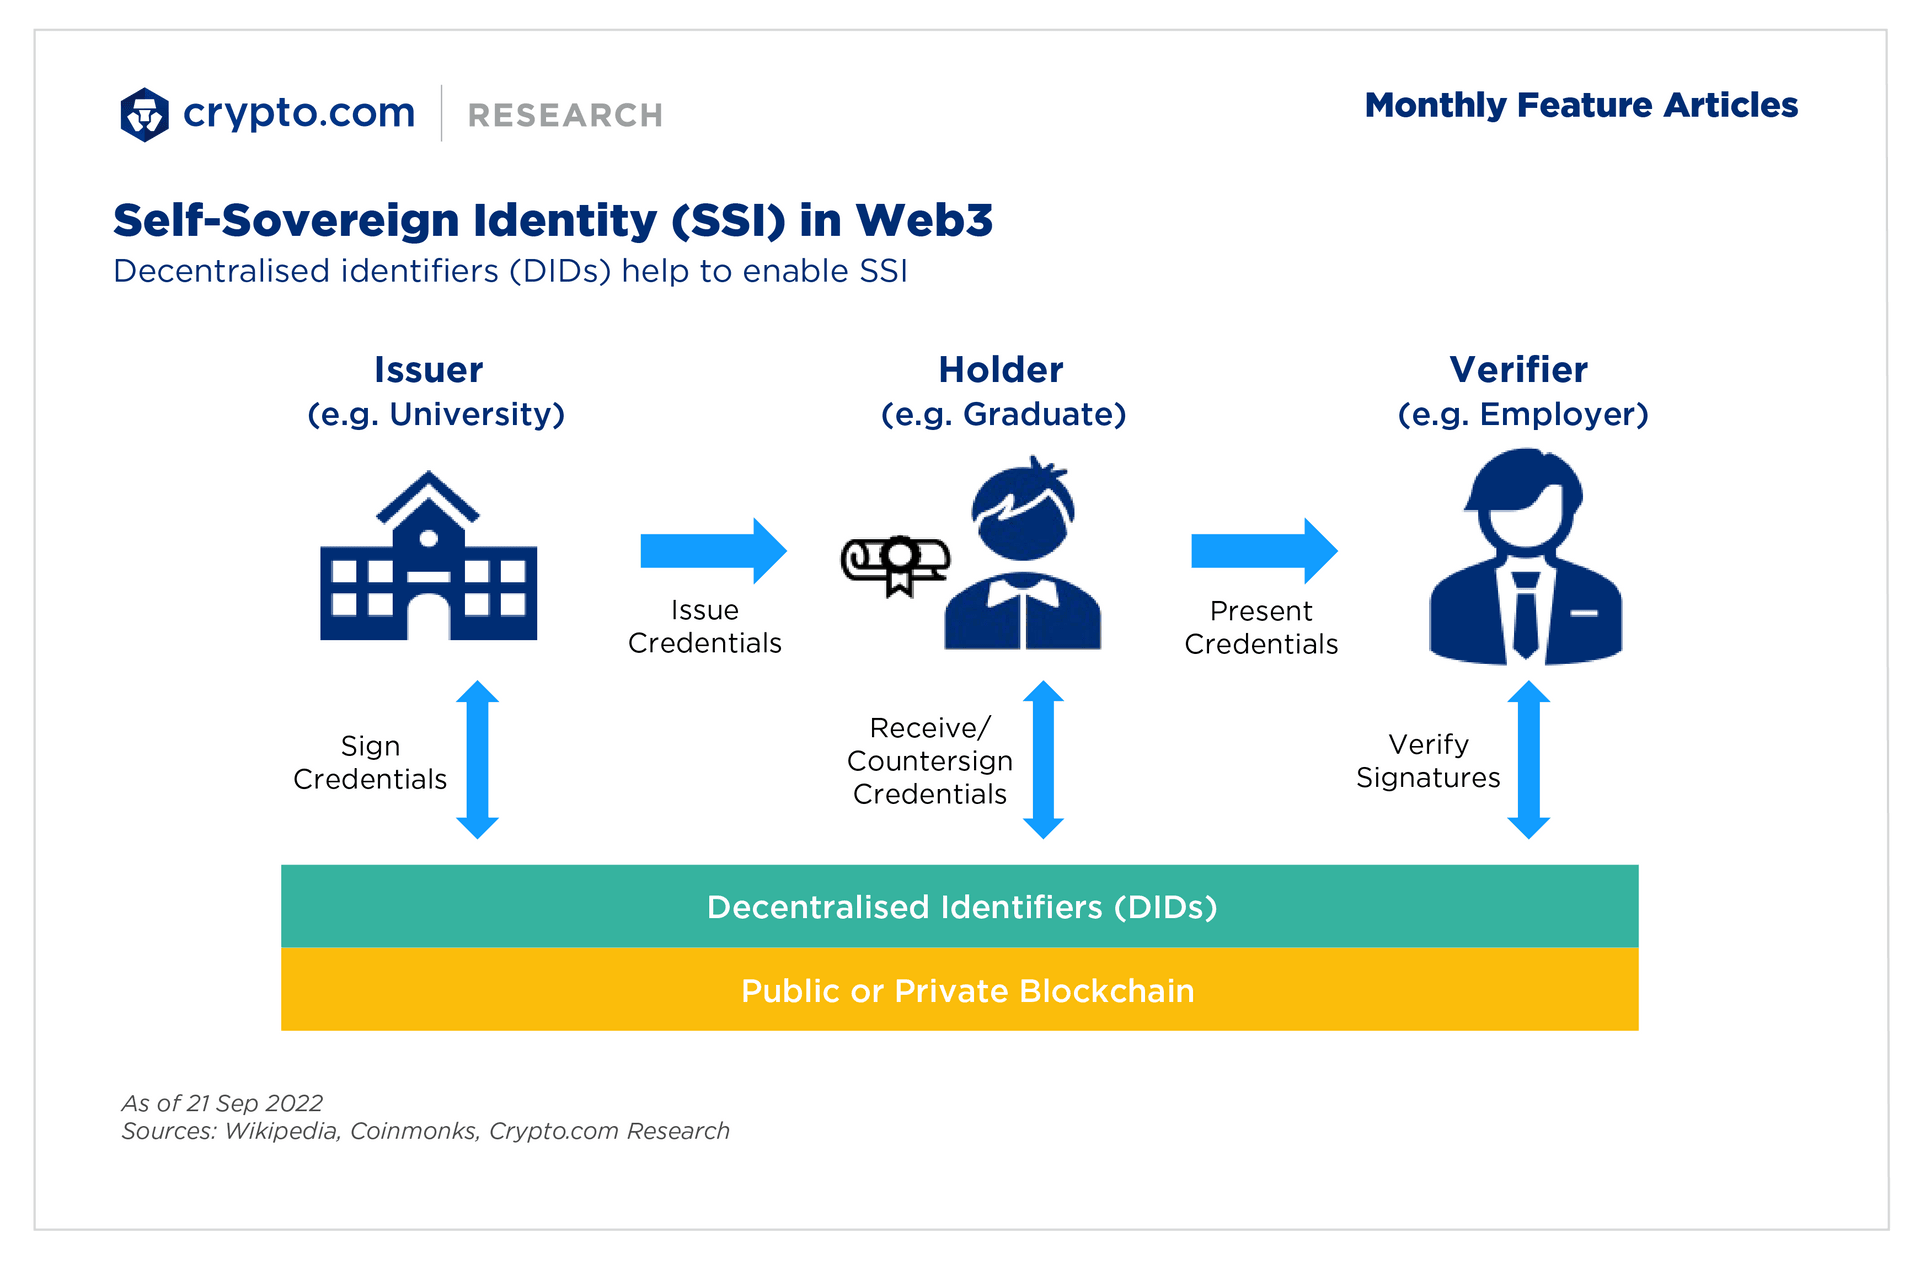 Self-sovereign identity in Web3